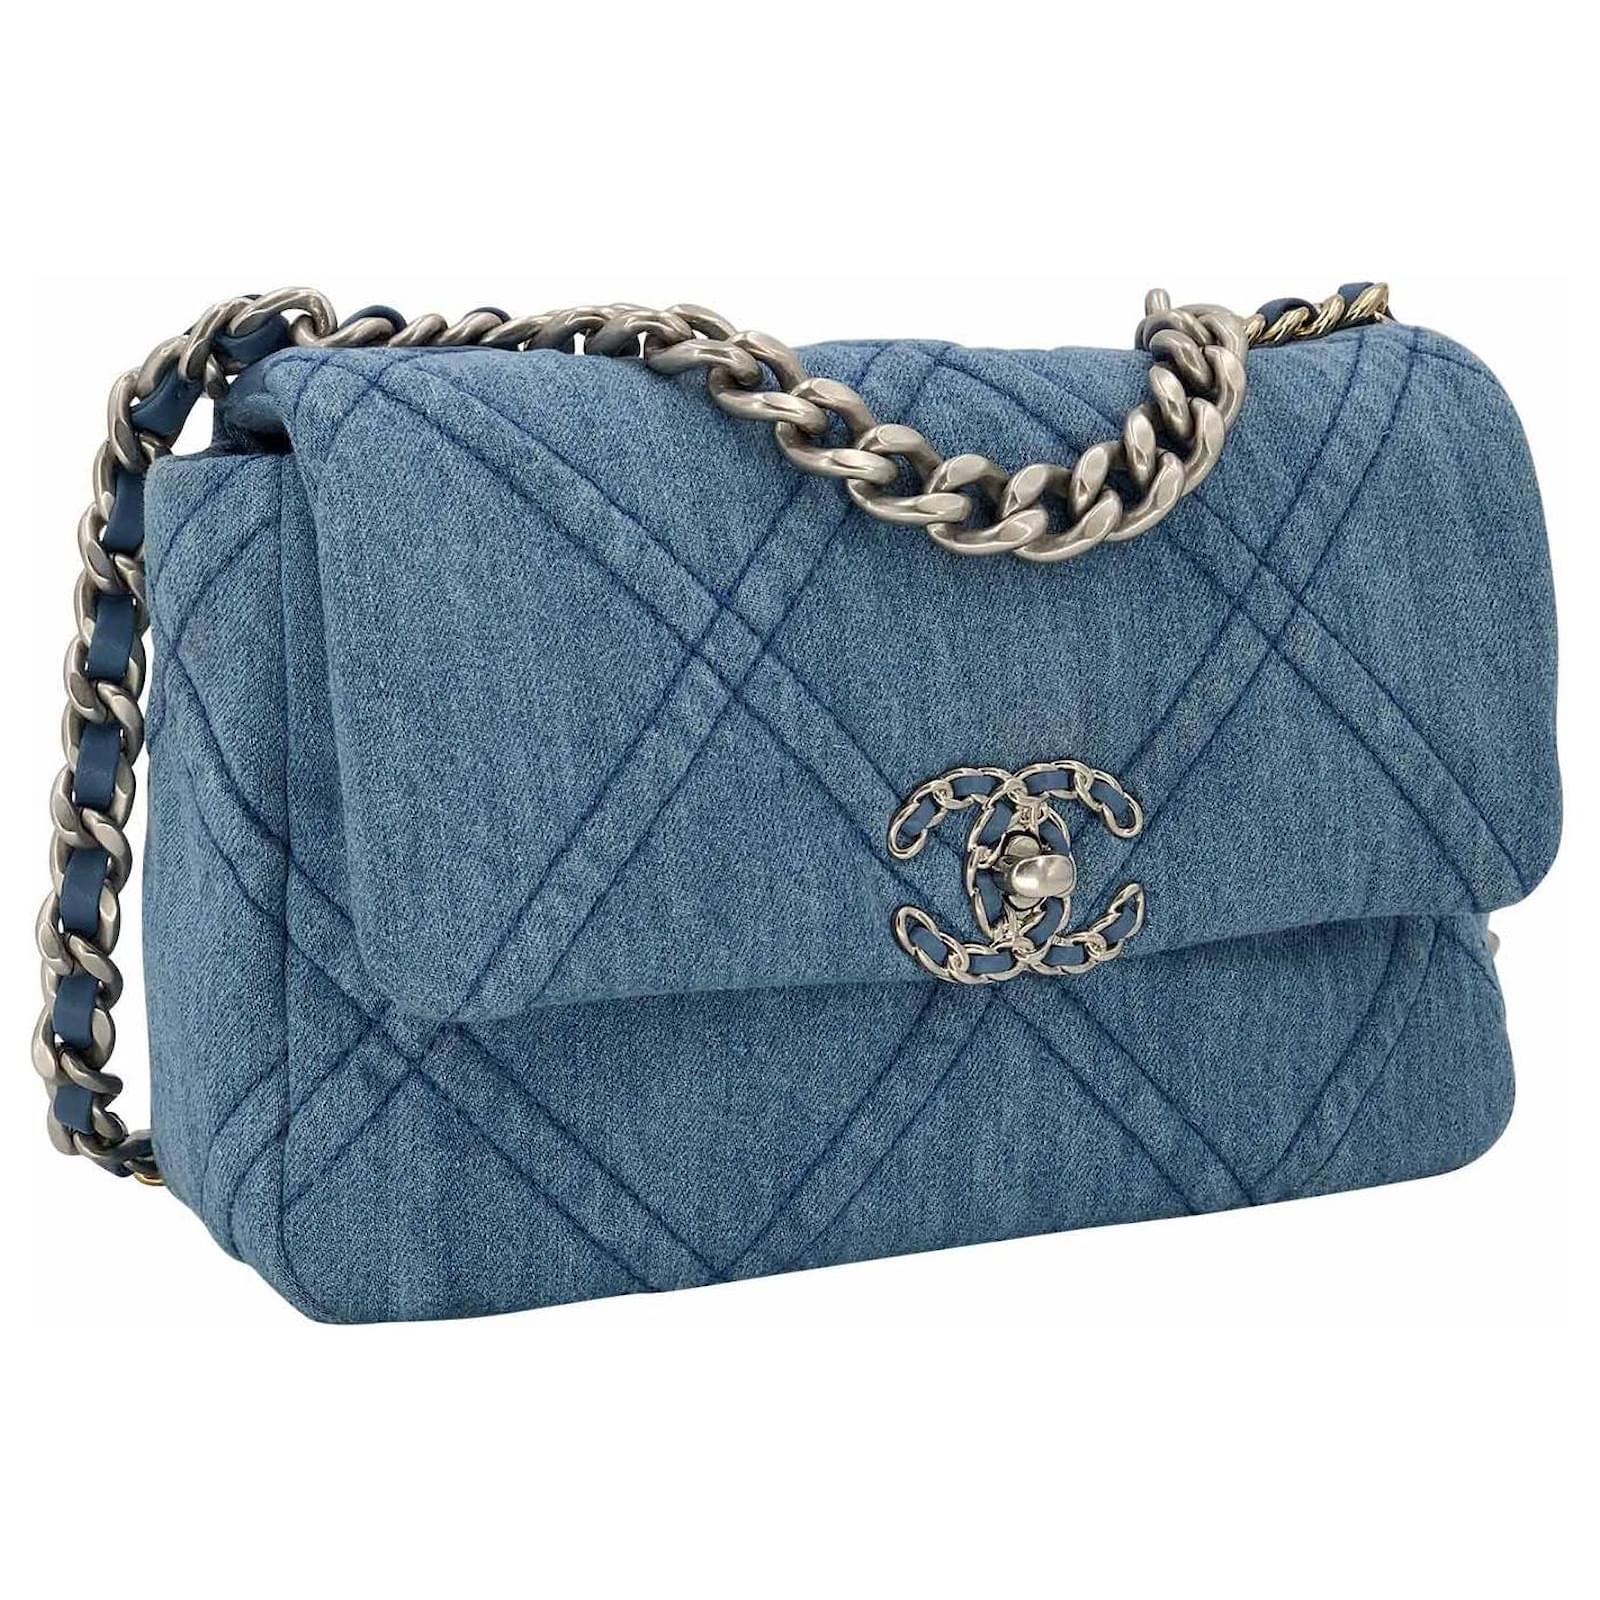 Chanel 19 flap bag in denim with silver & gold hardware